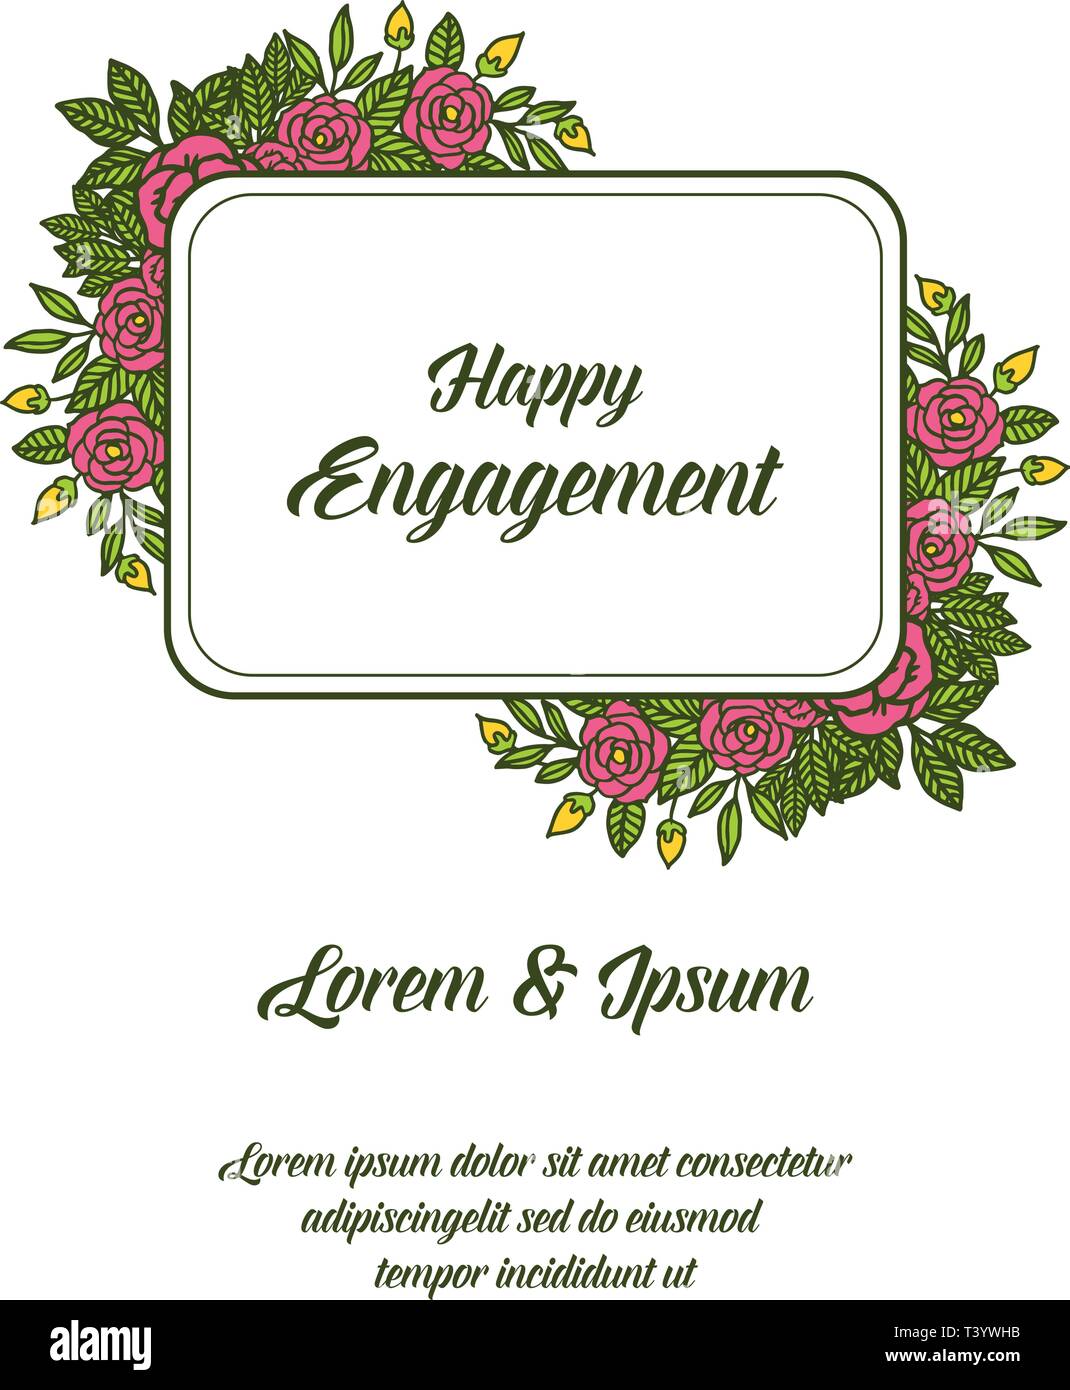 Vector illustration happy engagement greeting card with style of ...